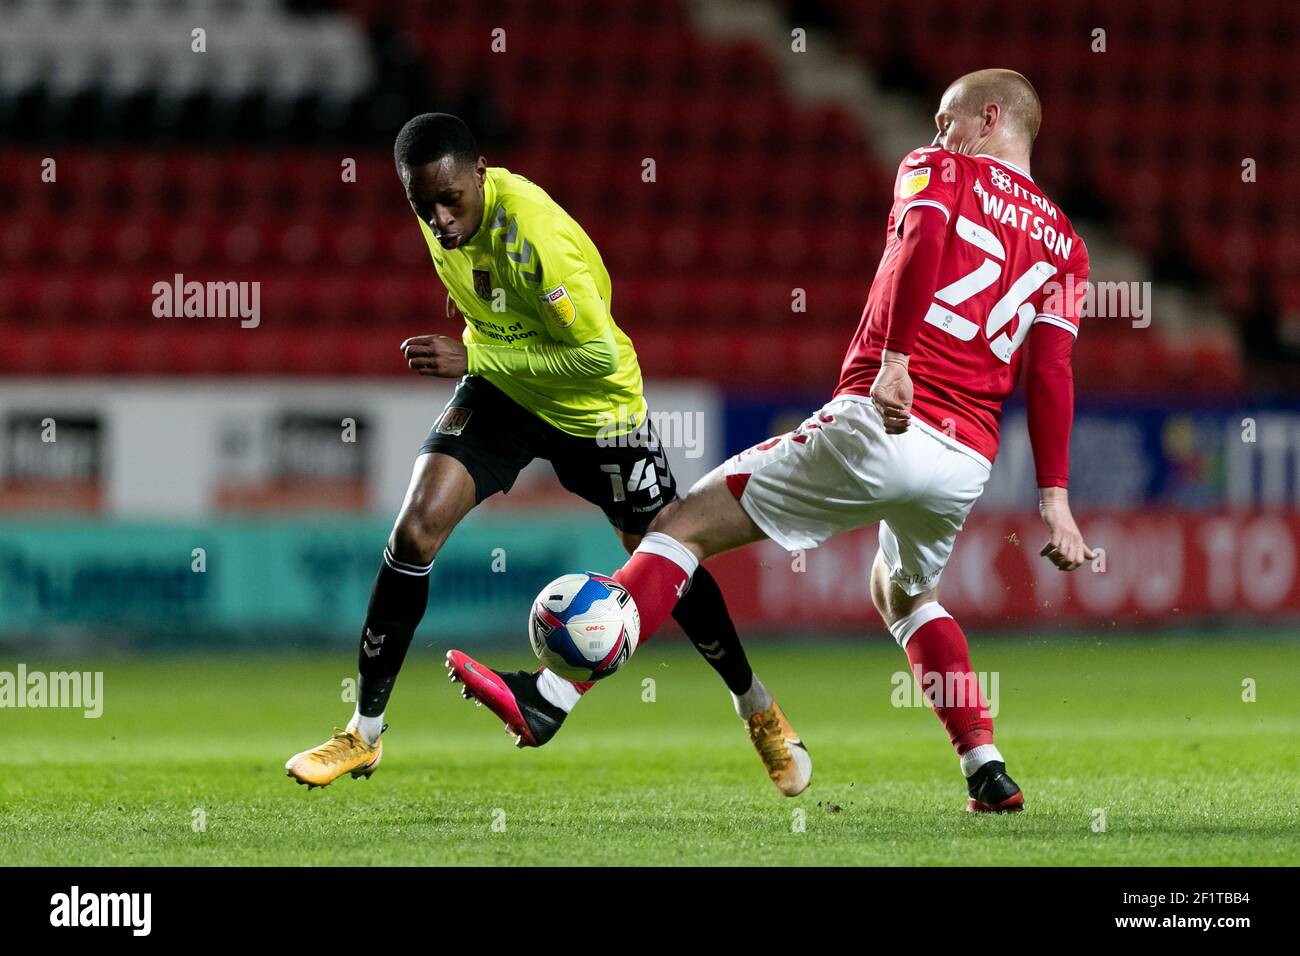 LONDON. UK. MARCH 9TH: Mickel Miller of Northampton Town and Ben Watson of Charlton compete for the ball during the Sky Bet League 1 match between Charlton Athletic and Northampton Town at The Valley, London on Tuesday 9th March 2021. (Credit: Juan Gasparini | MI News) Credit: MI News & Sport /Alamy Live News Stock Photo